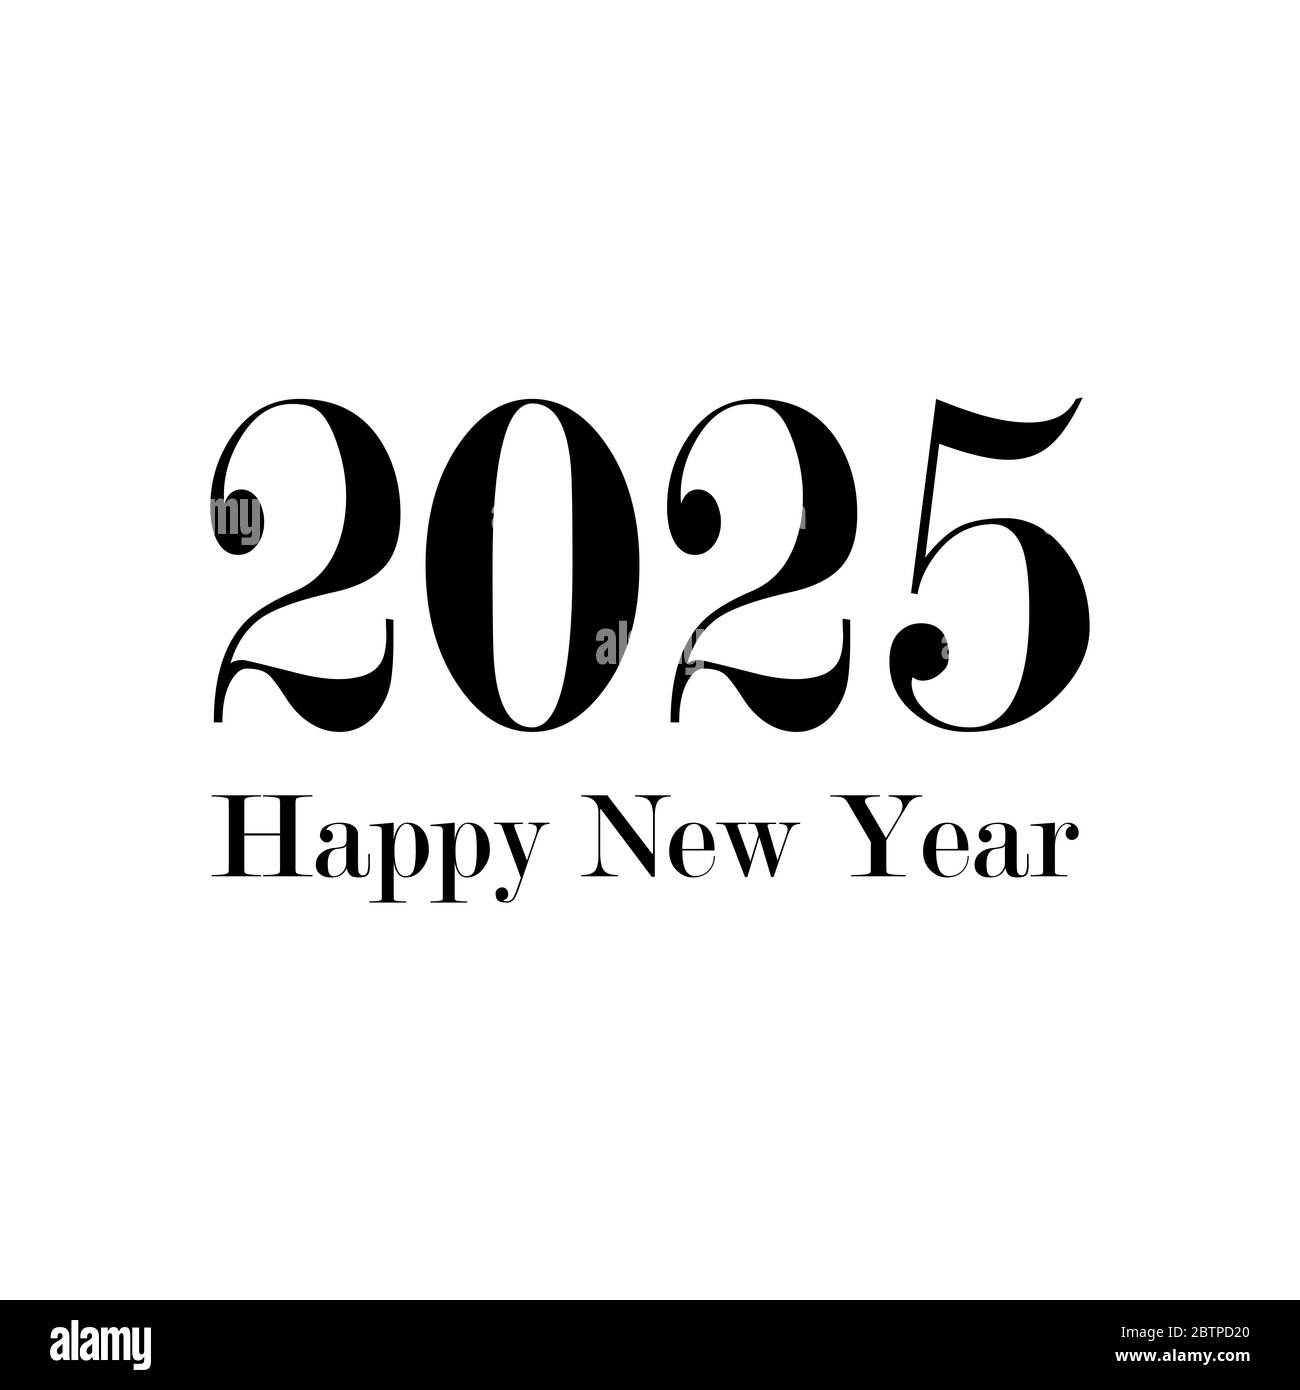 Happy new year 2025 Cut Out Stock Images & Pictures - Alamy